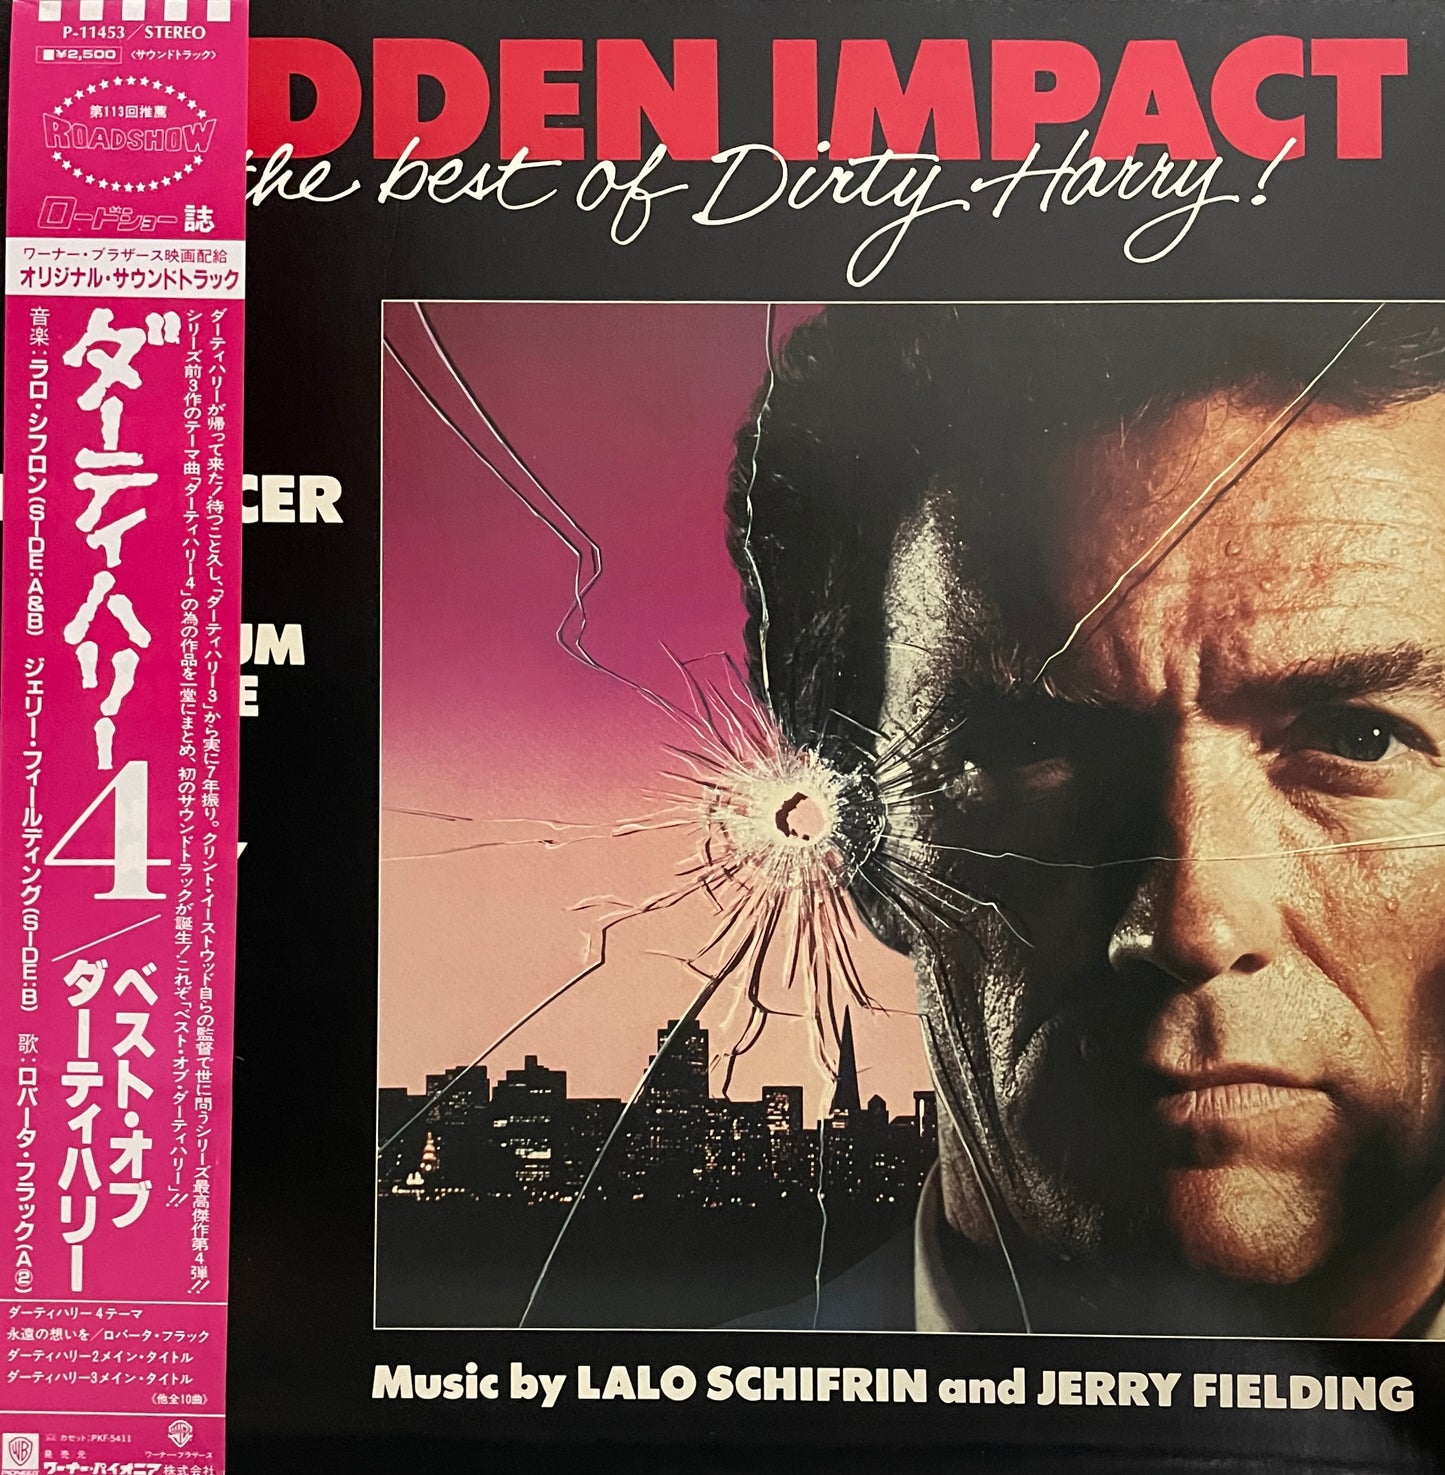 Lalo Schifrin / Jerry Fielding "Sudden Impact And The Best Of Dirty Harry" (1983)